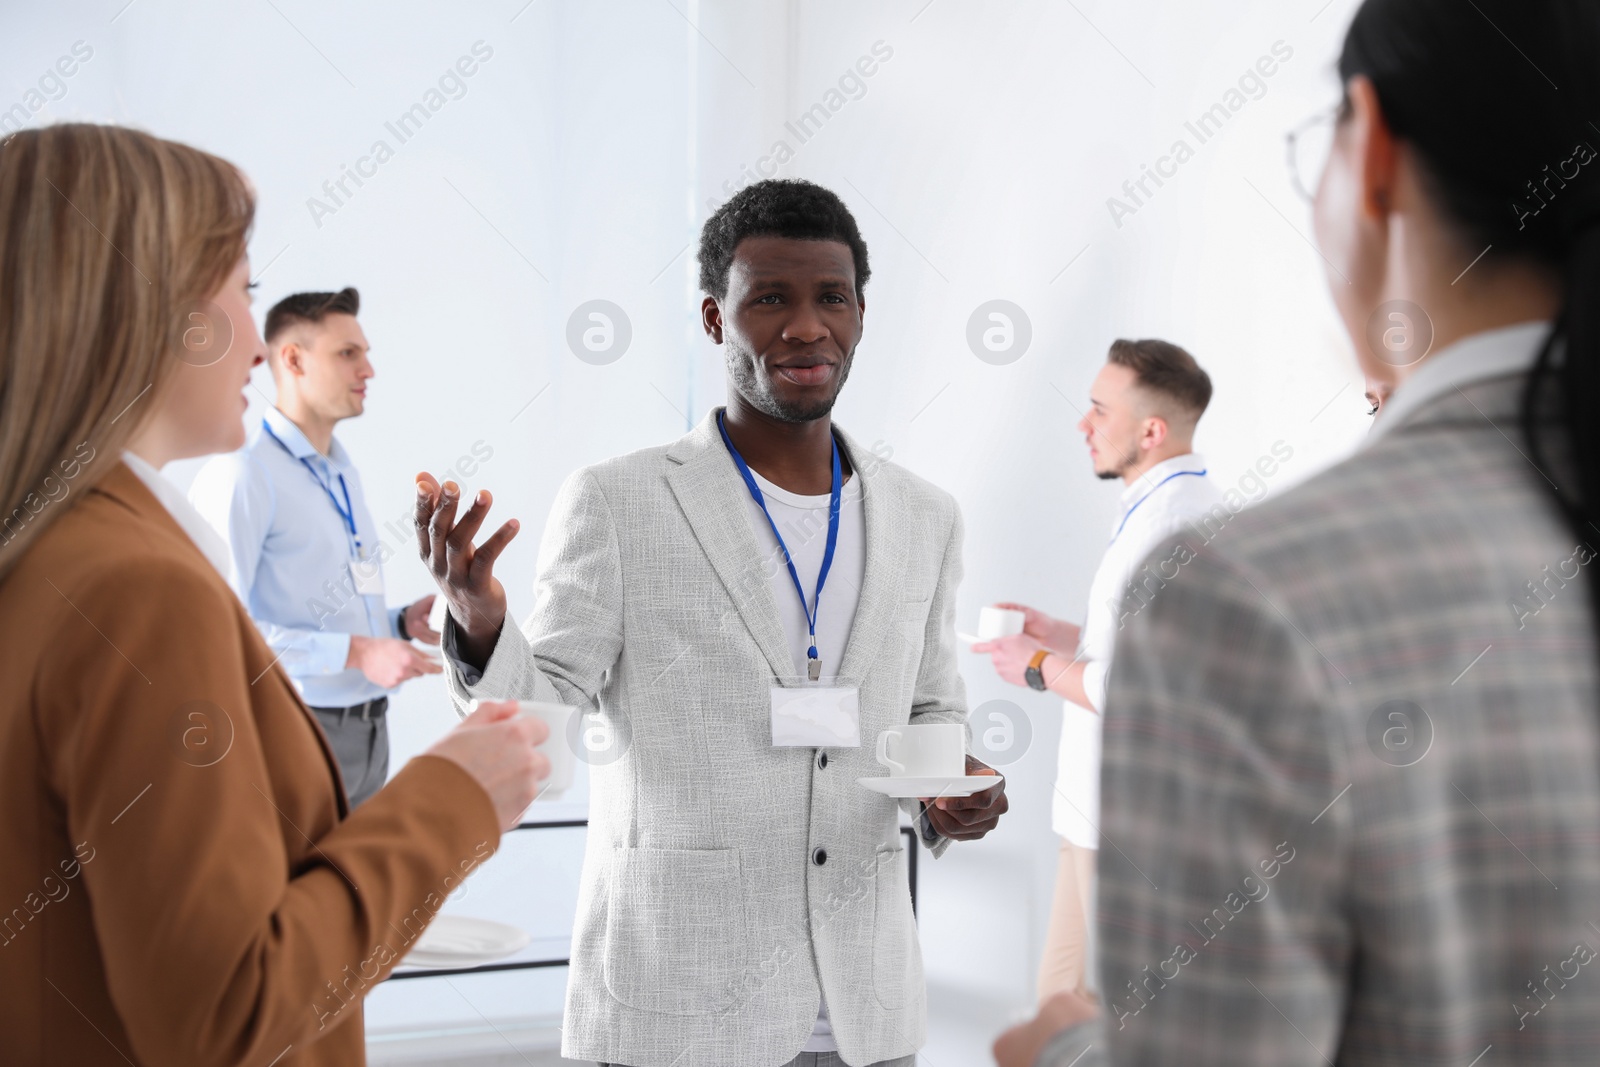 Photo of Group of people chatting during coffee break indoors